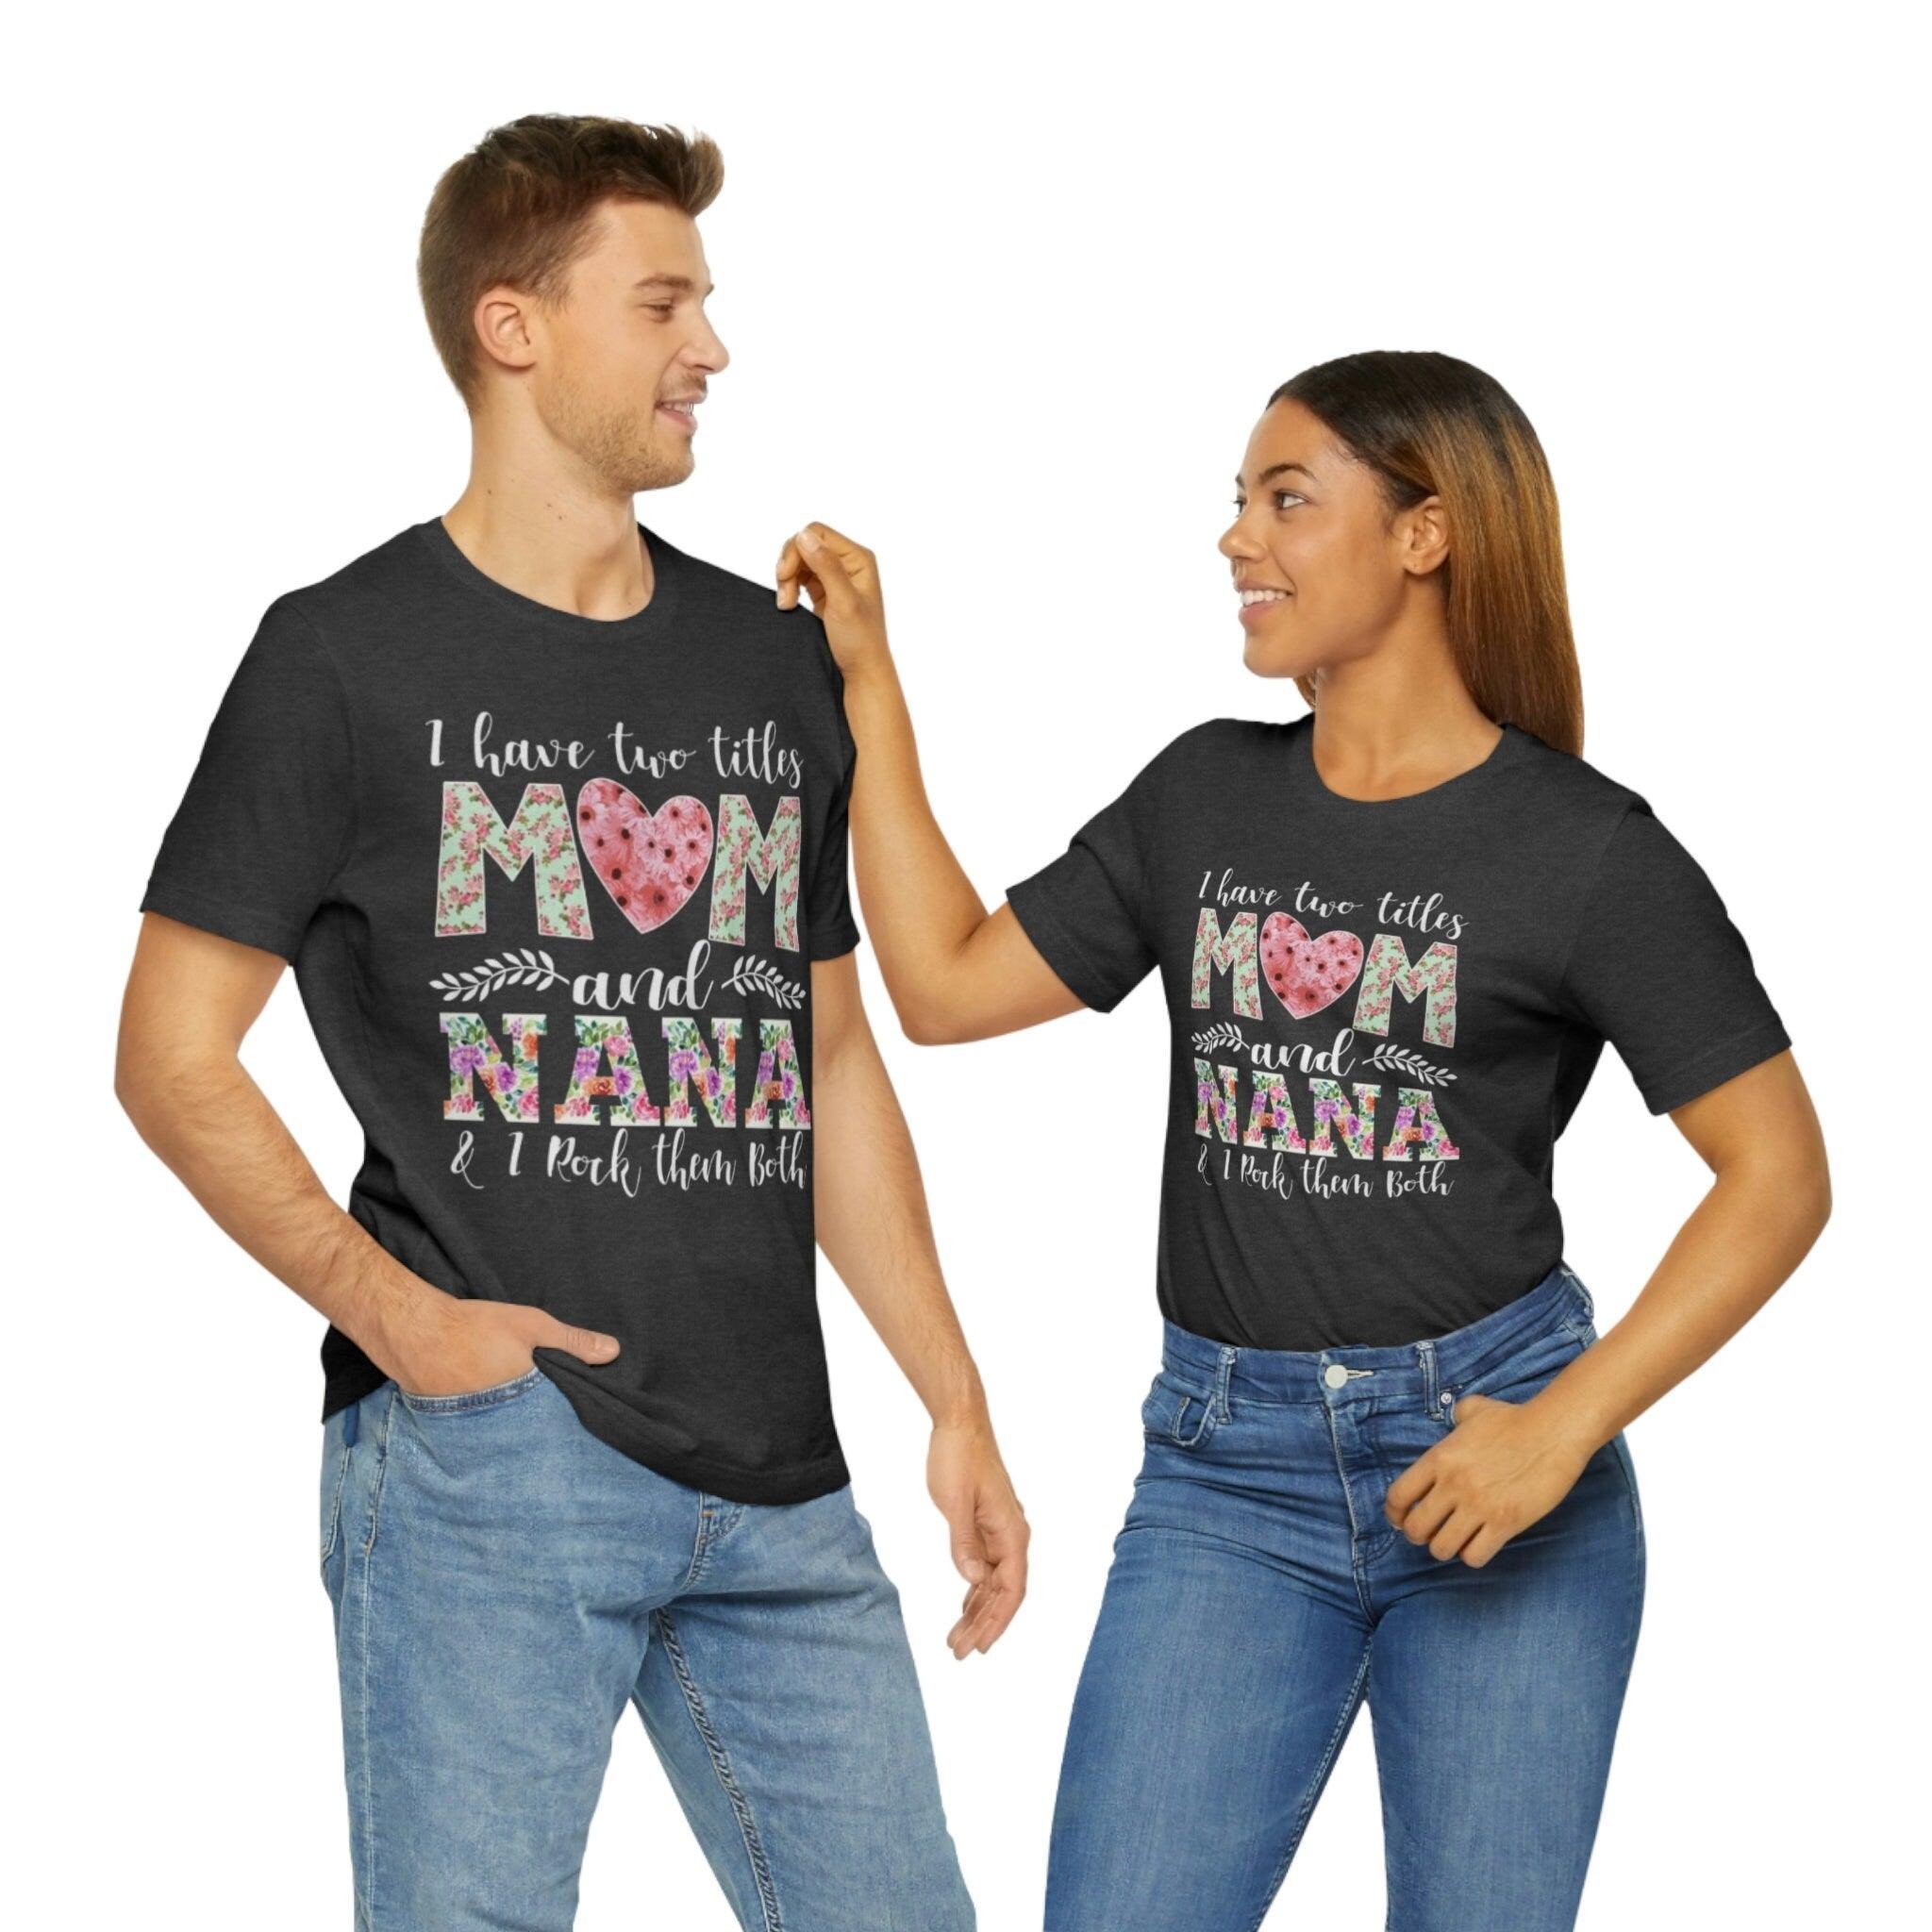 I Have Two Titles Mom and Nana and I Rock Them Both Mother Grandmother Tshirt Mother's Day Gift Shirt - plusminusco.com